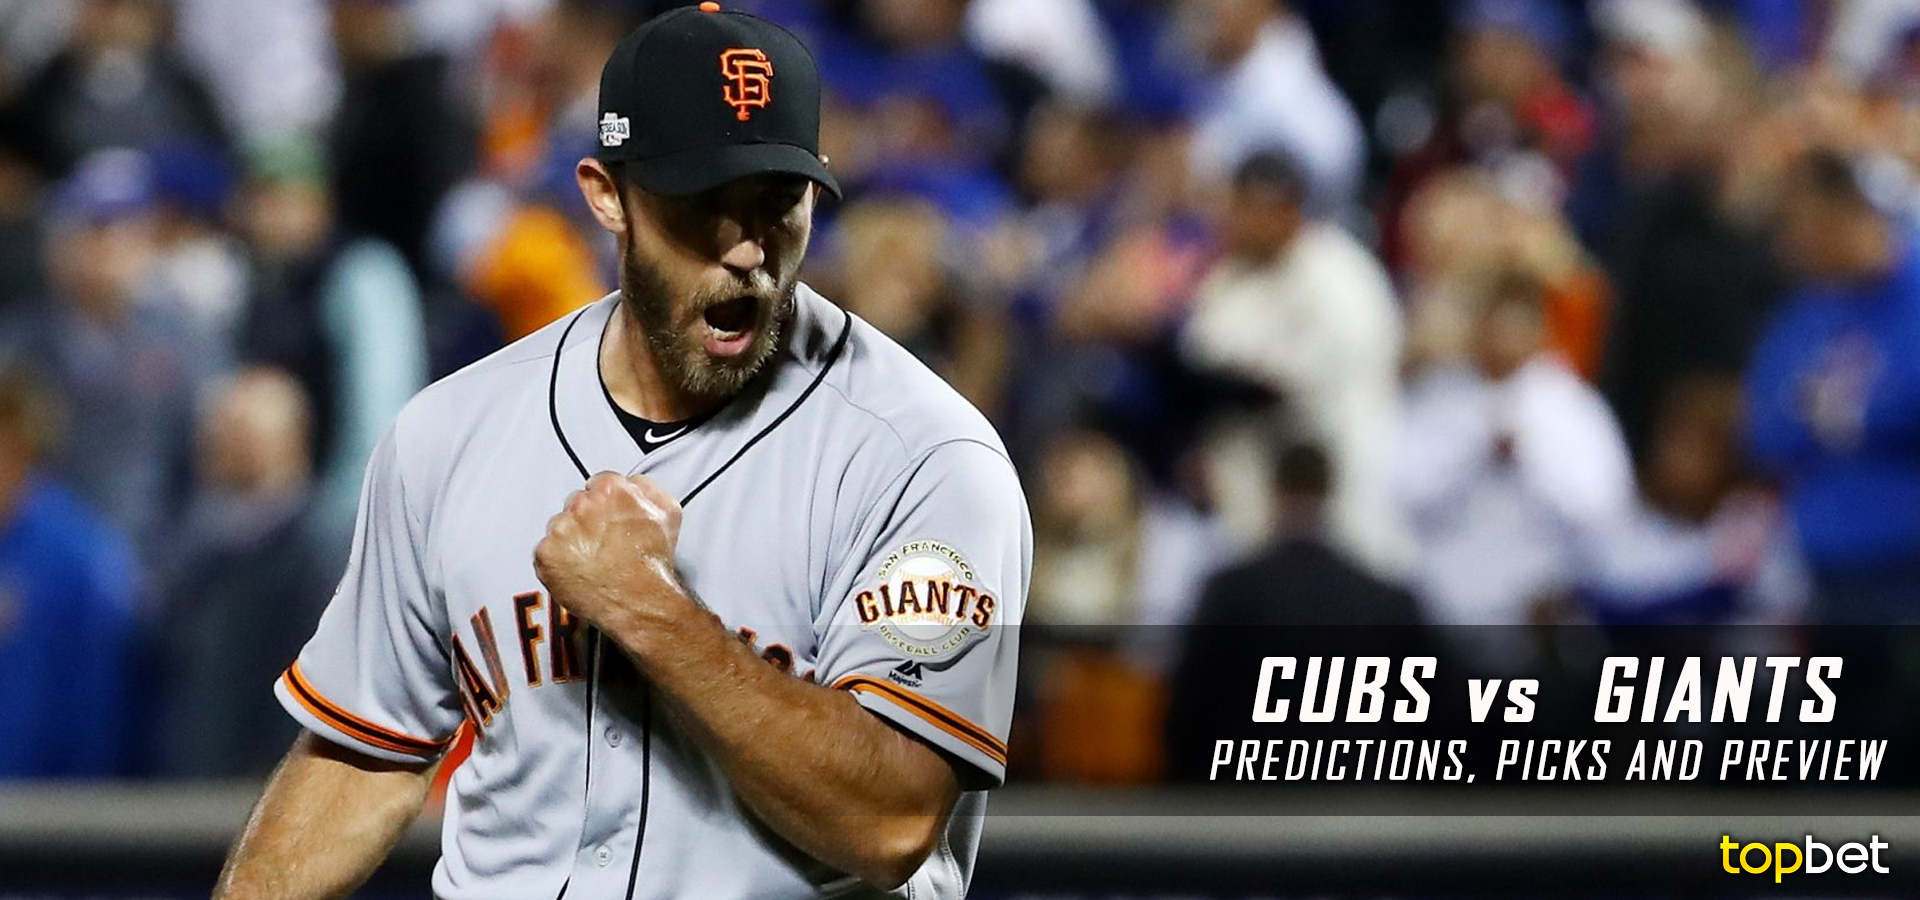 Cubs vs Giants 2016 NLDS Game 3 Predictions, Picks & Preview